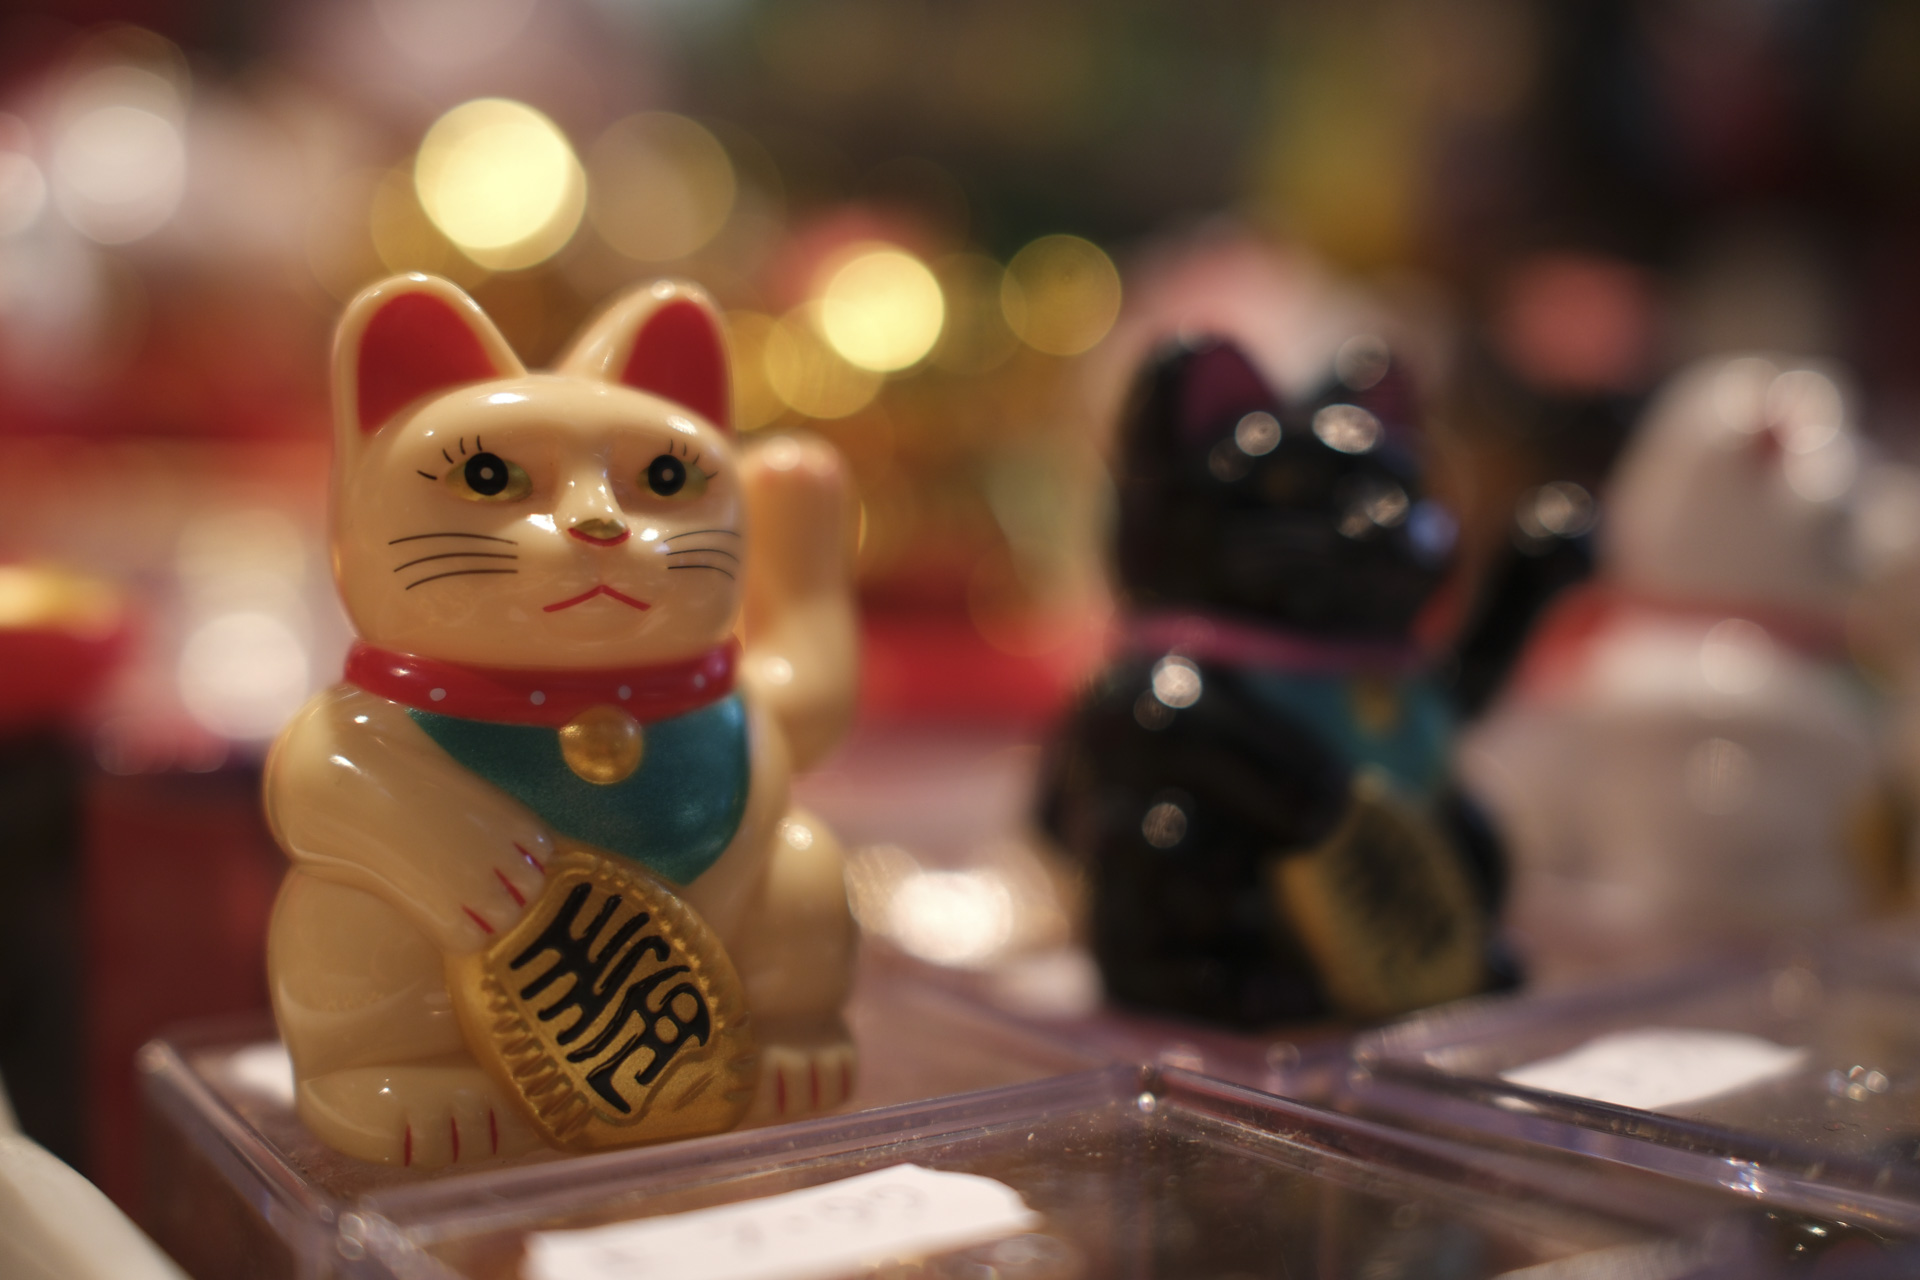 Chinese lucky cat photo taken at f/2 using the Fujifilm X100VI